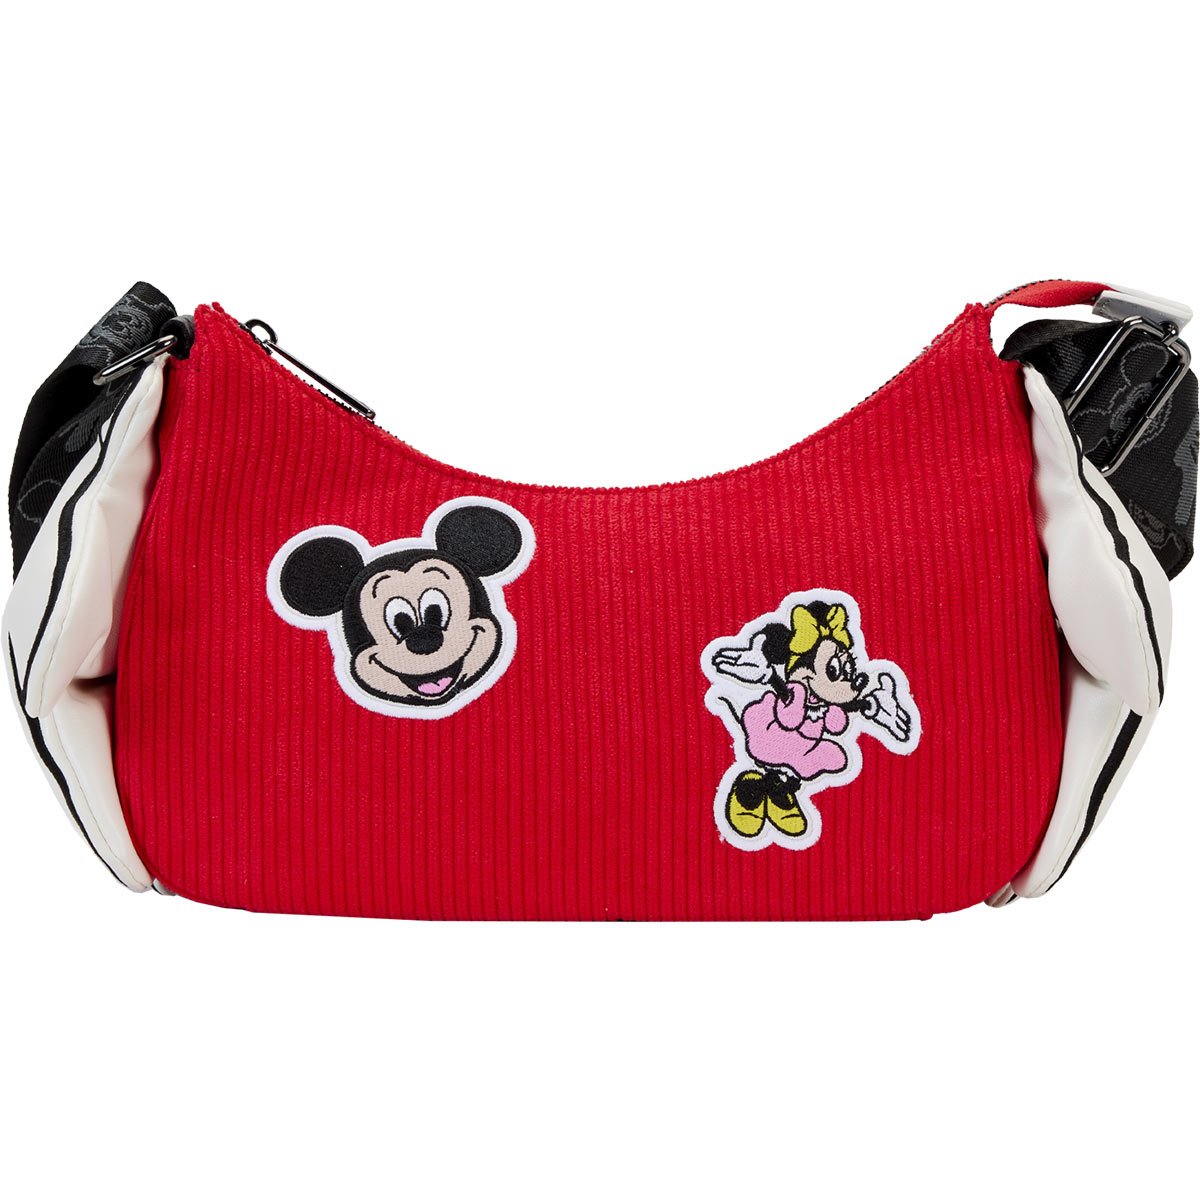 Minnie Mouse Crossbody Purse ❤️ See photos for... - Depop